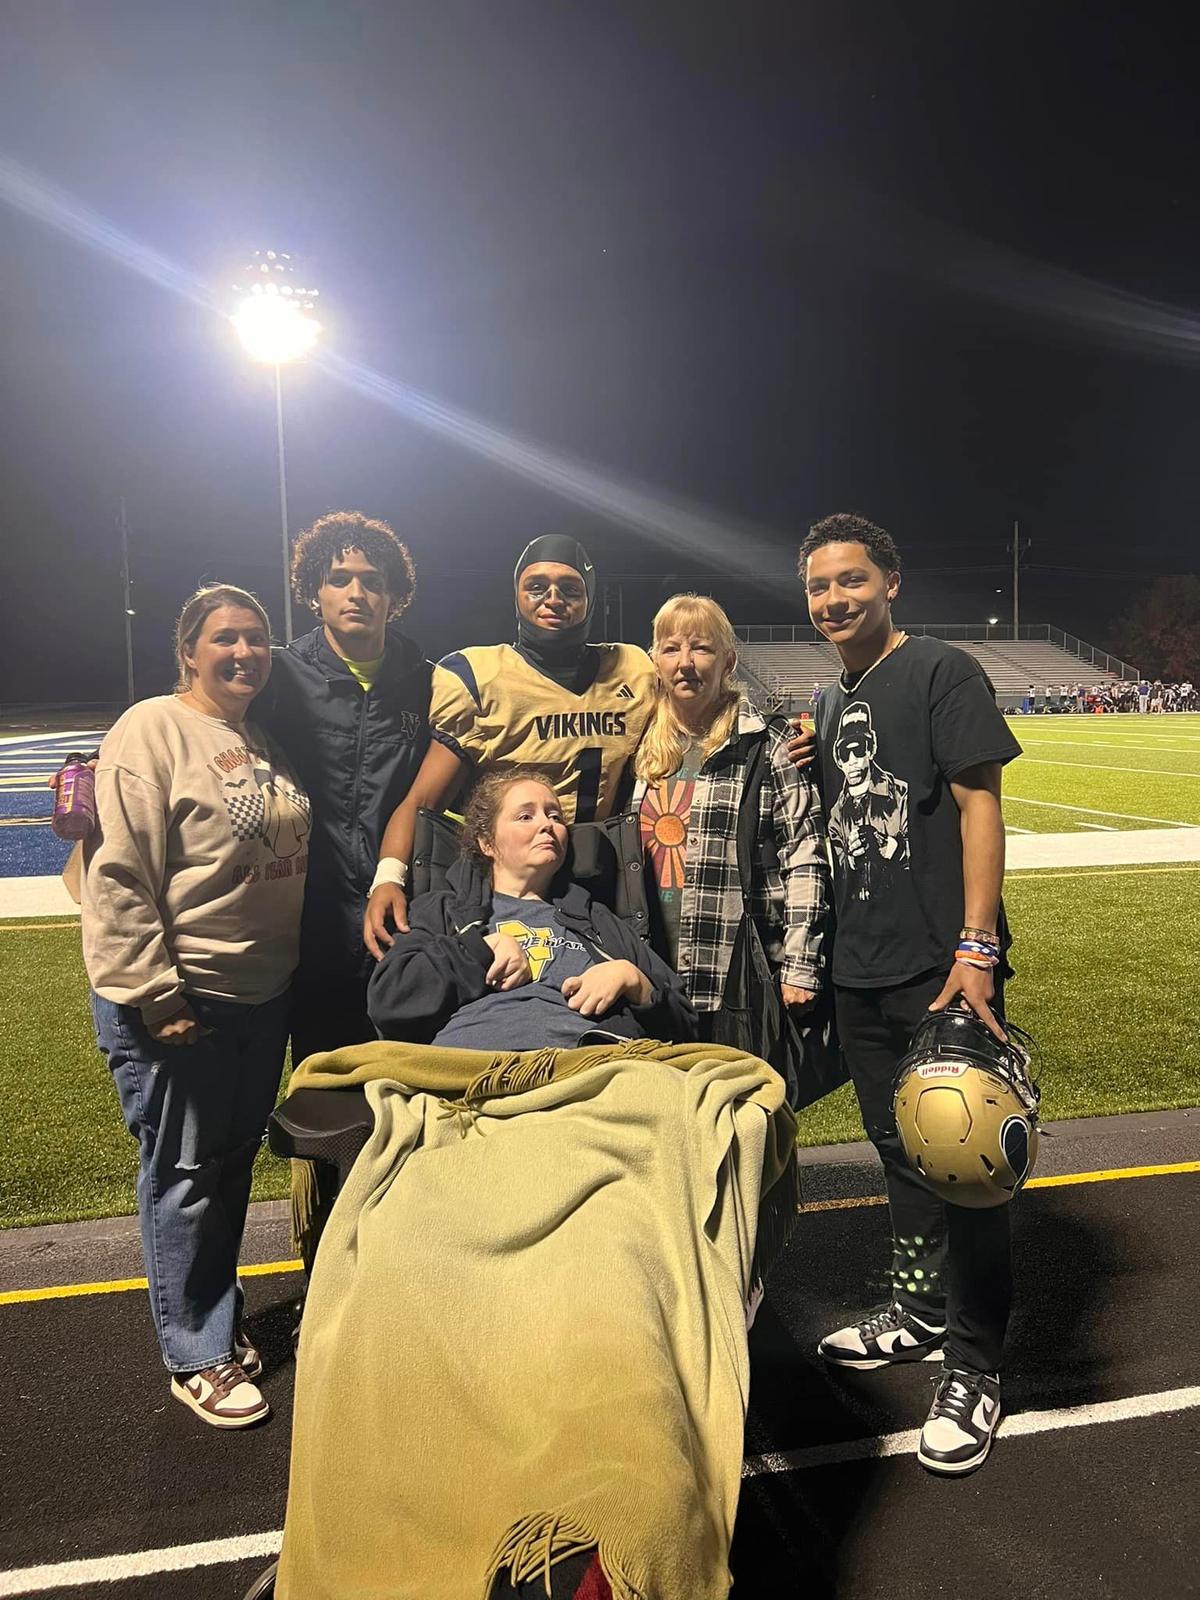 Ms. Flewellen with her friend Cassie Lee (L), mom, and sons Skylar, Julian, and Daeton. (Courtesy of <a href="https://www.facebook.com/profile.php?id=61554133355459">Jenn’s Journey: A Miracle in the Making</a>)